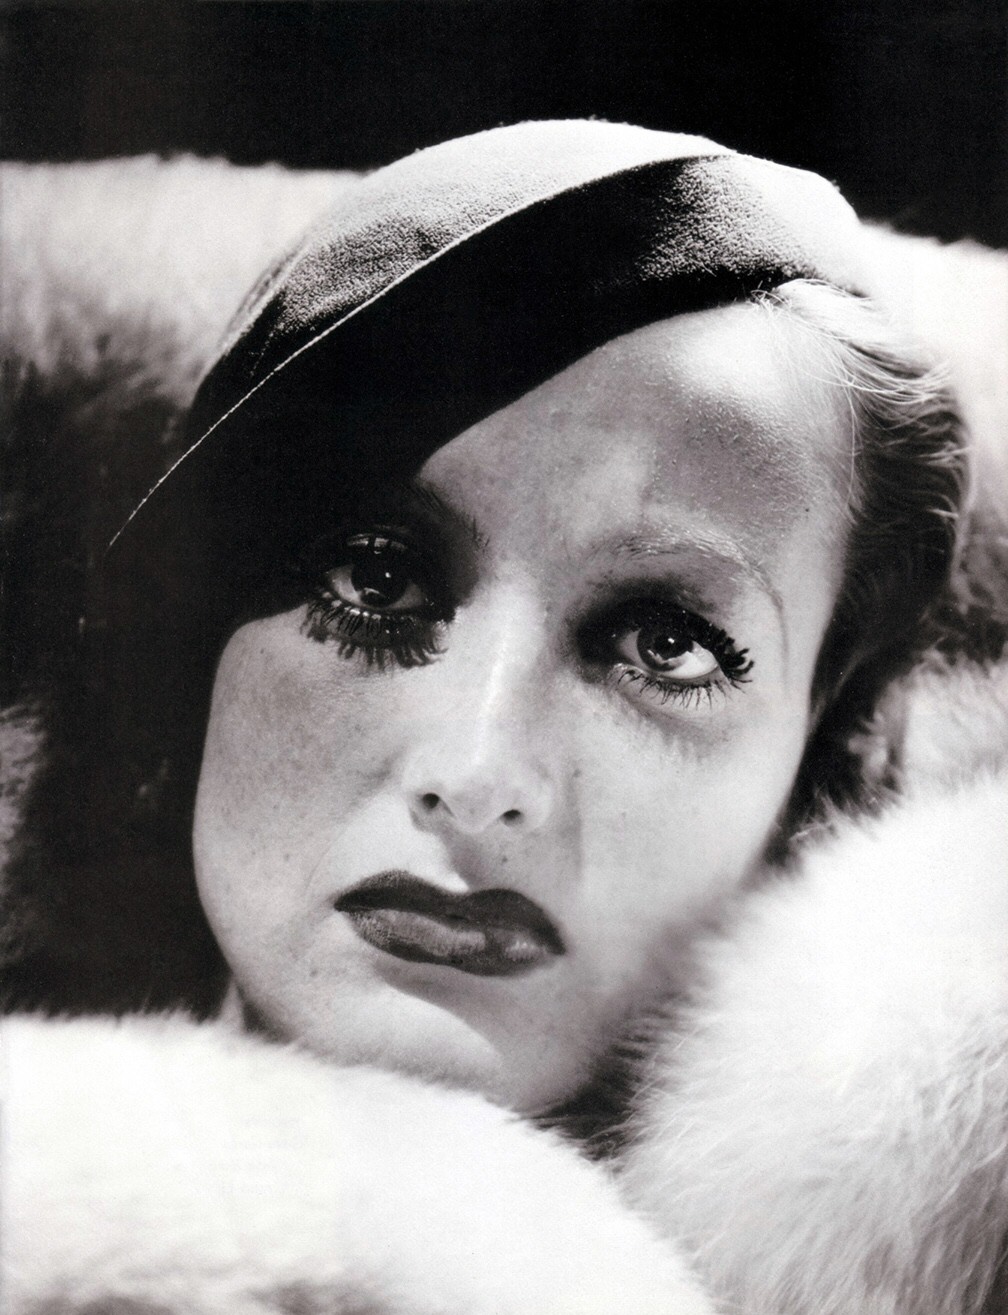 1932. 'Letty Lynton' publicity by Hurrell.